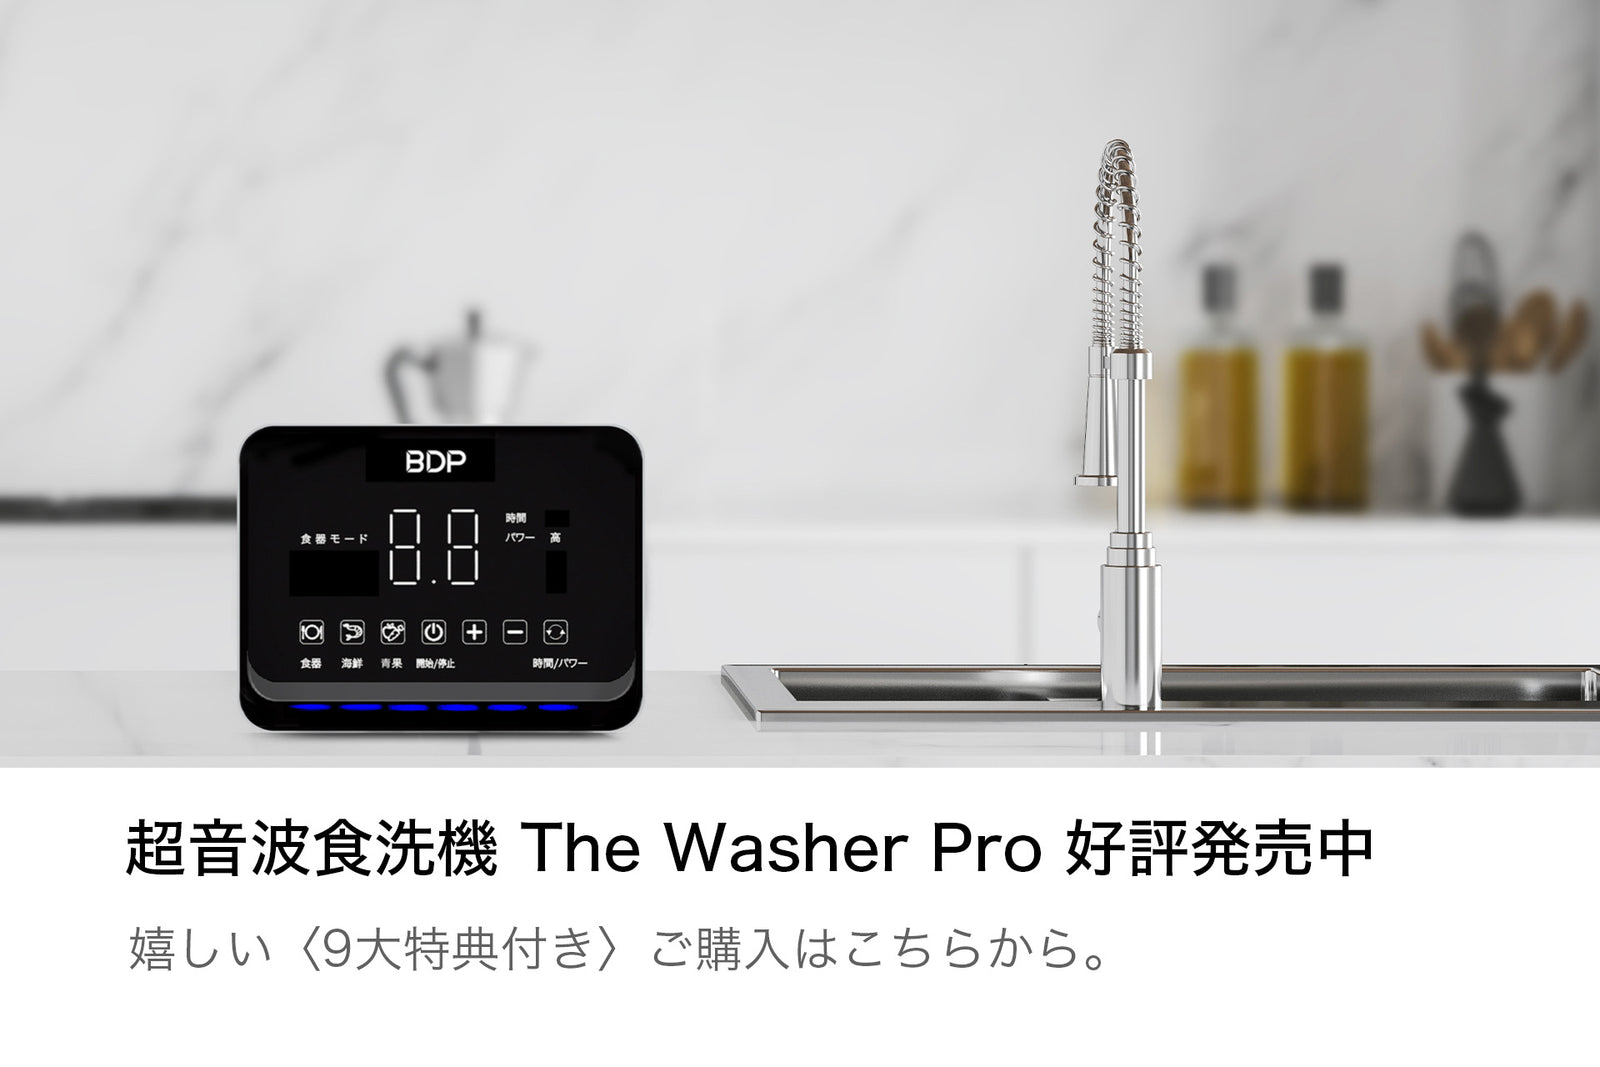 BDP究極に場所取らない、 工事不要超音波食洗機 The Washer Pro